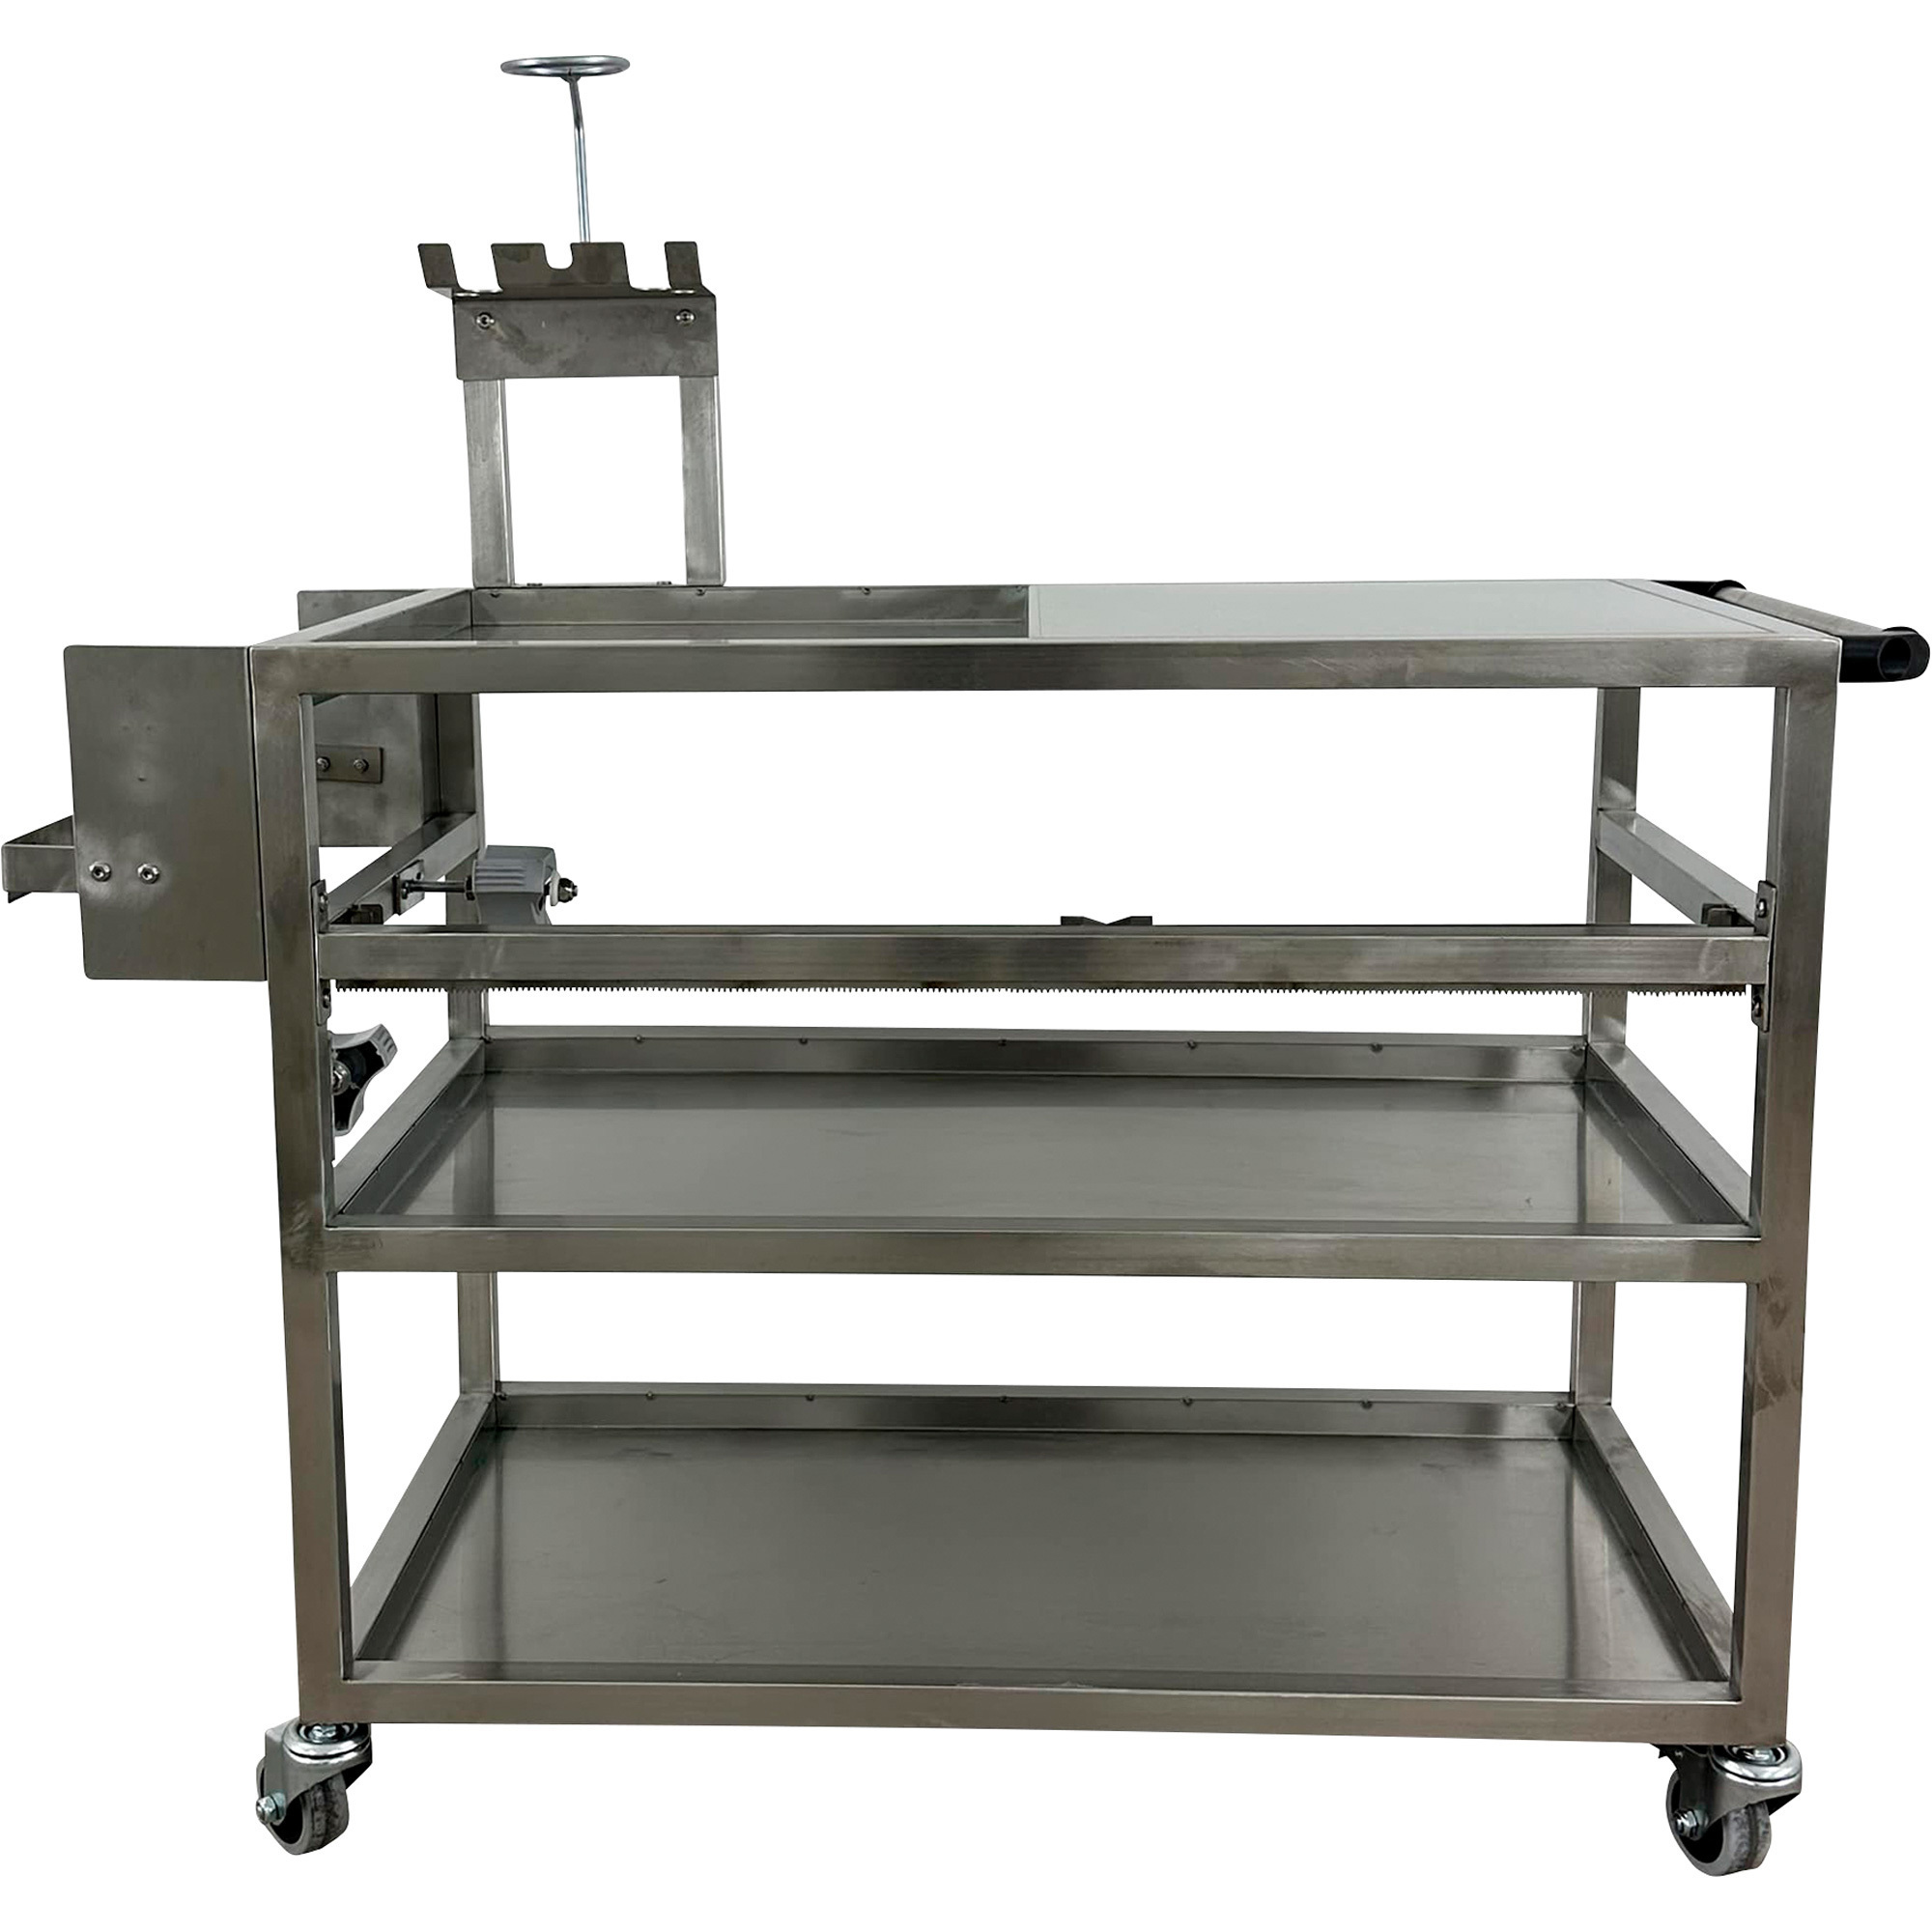 Ideal Paint Storage Mixing Table and Dispenser â 37Inch L x 22Inch W x 32Inch H, Model PSB-PSMTD